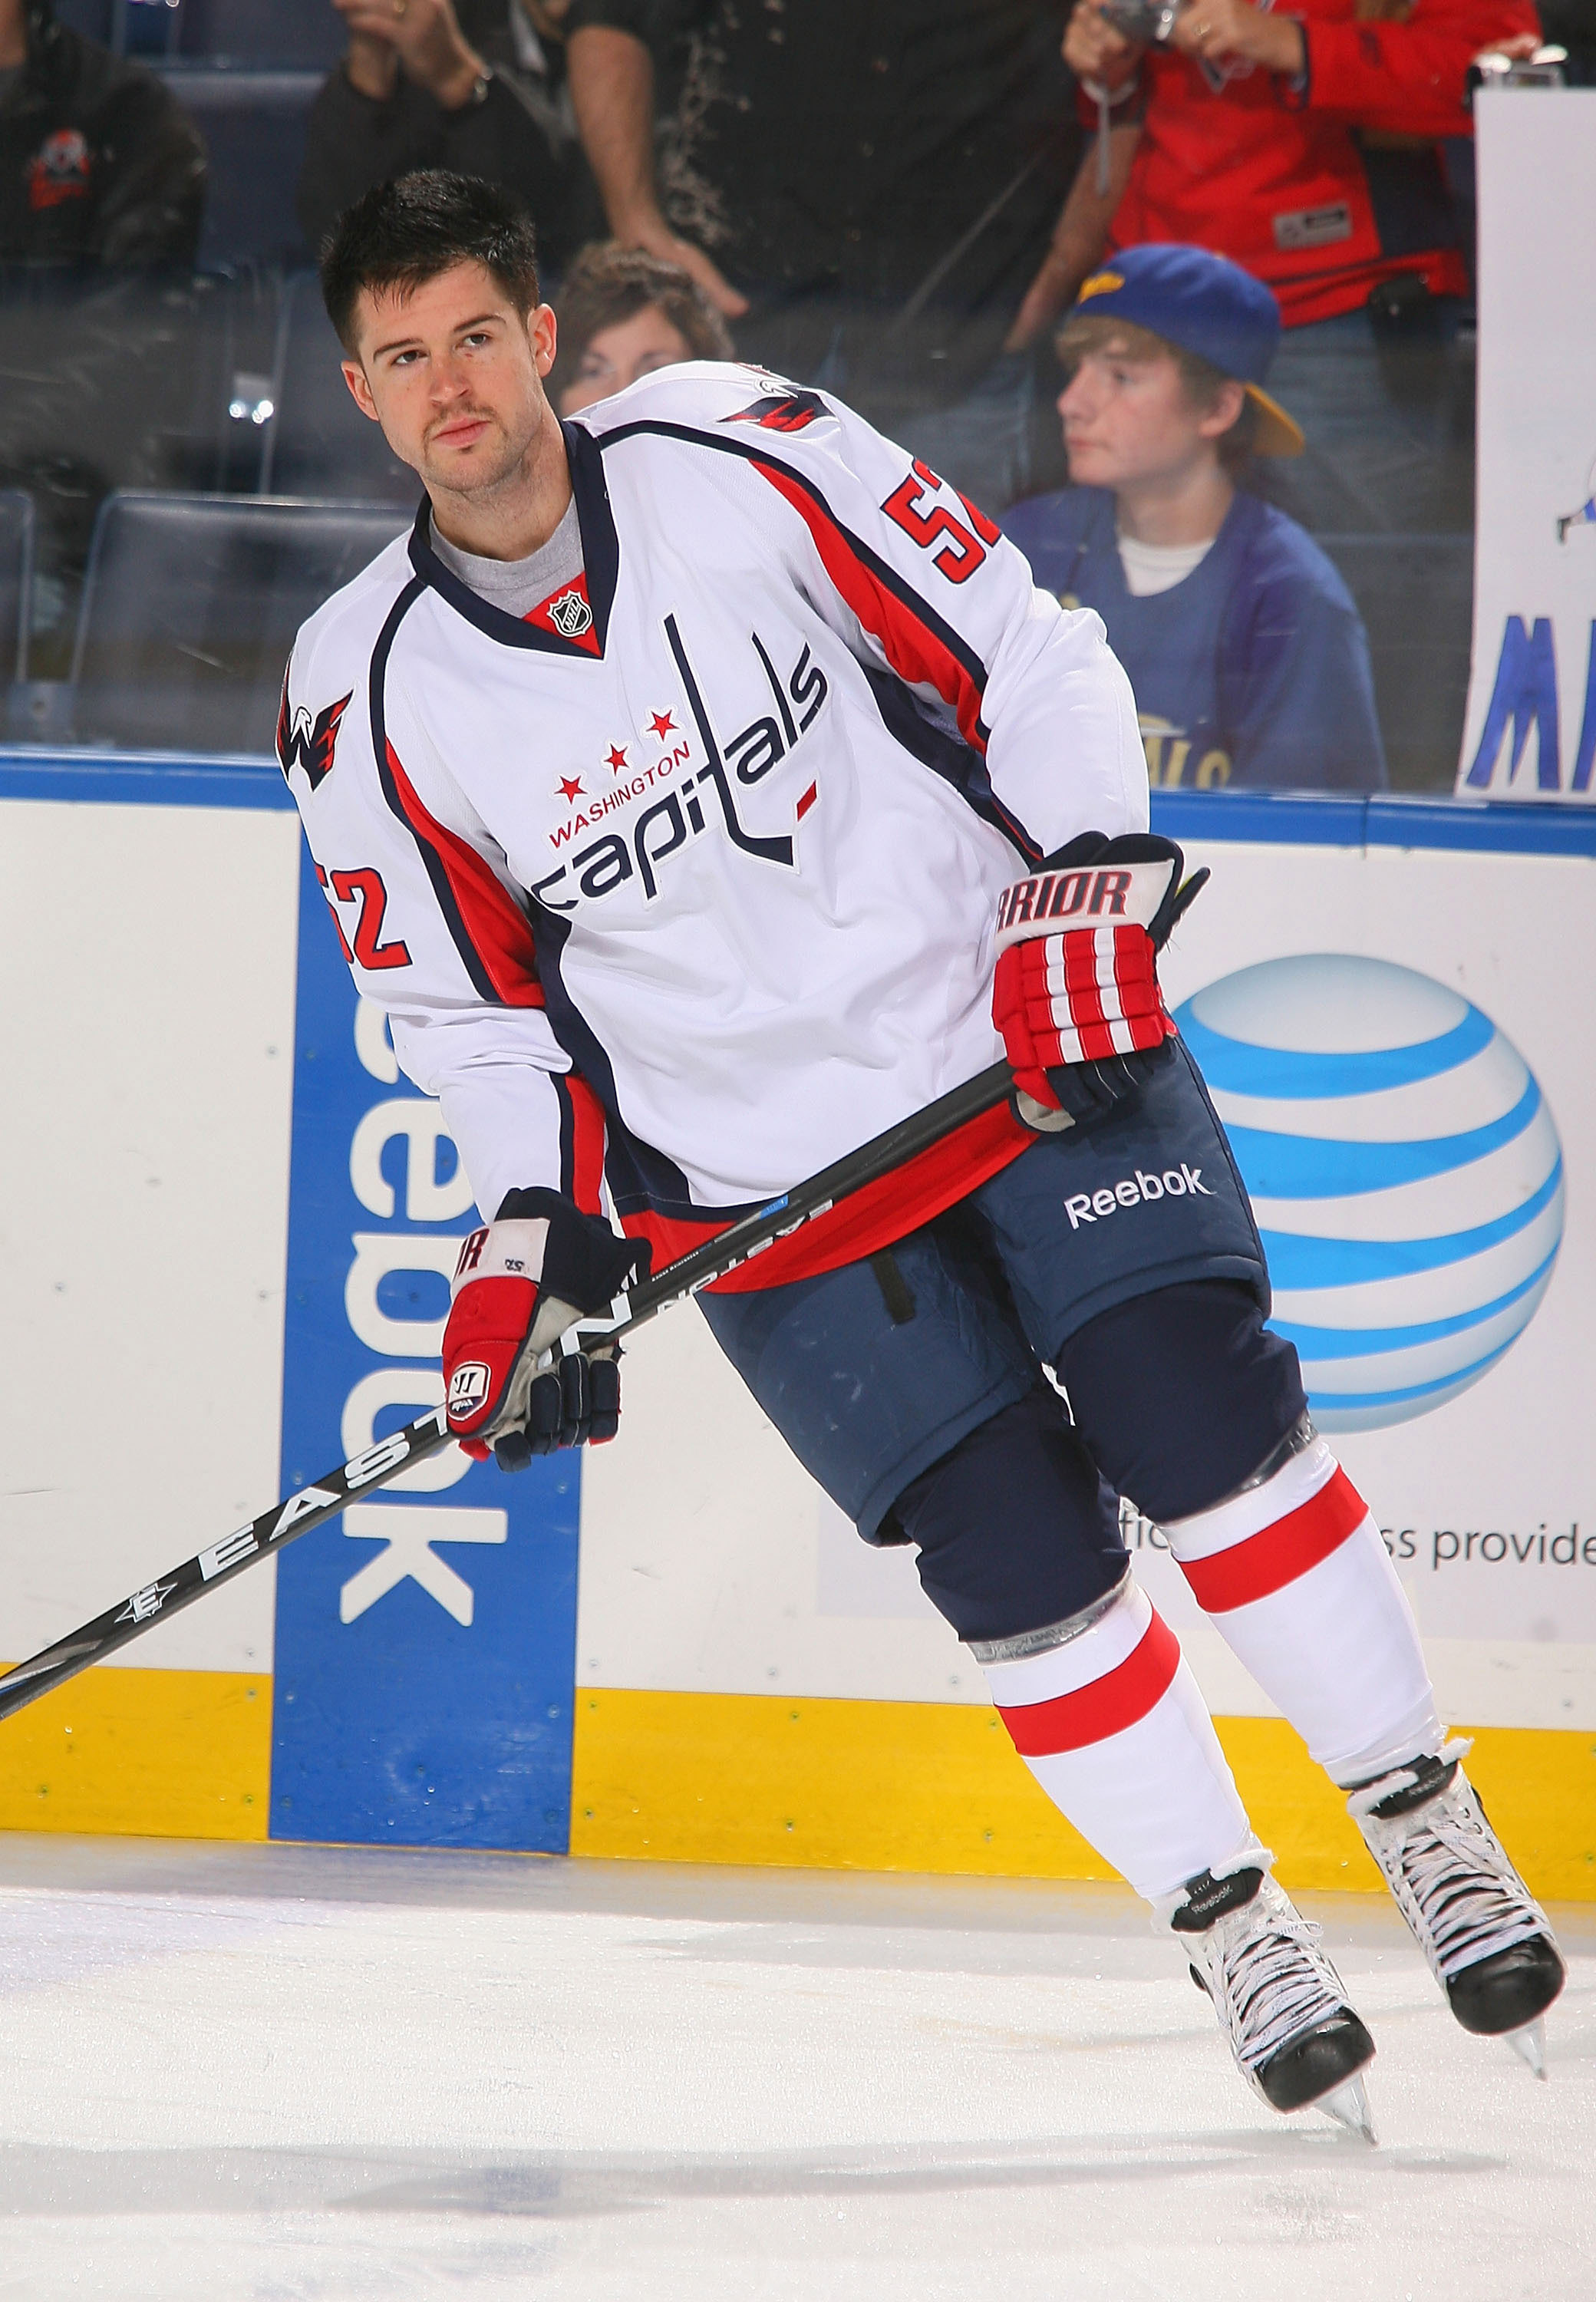 BUFFALO, NY - NOVEMBER 13:  Mike Green #52 of the Washington Capitals warms up prior to playing the Buffalo Sabres  at HSBC Arena on November13, 2010 in Buffalo, New York. Buffalo won 3-2 in overtime .  (Photo by Rick Stewart/Getty Images)